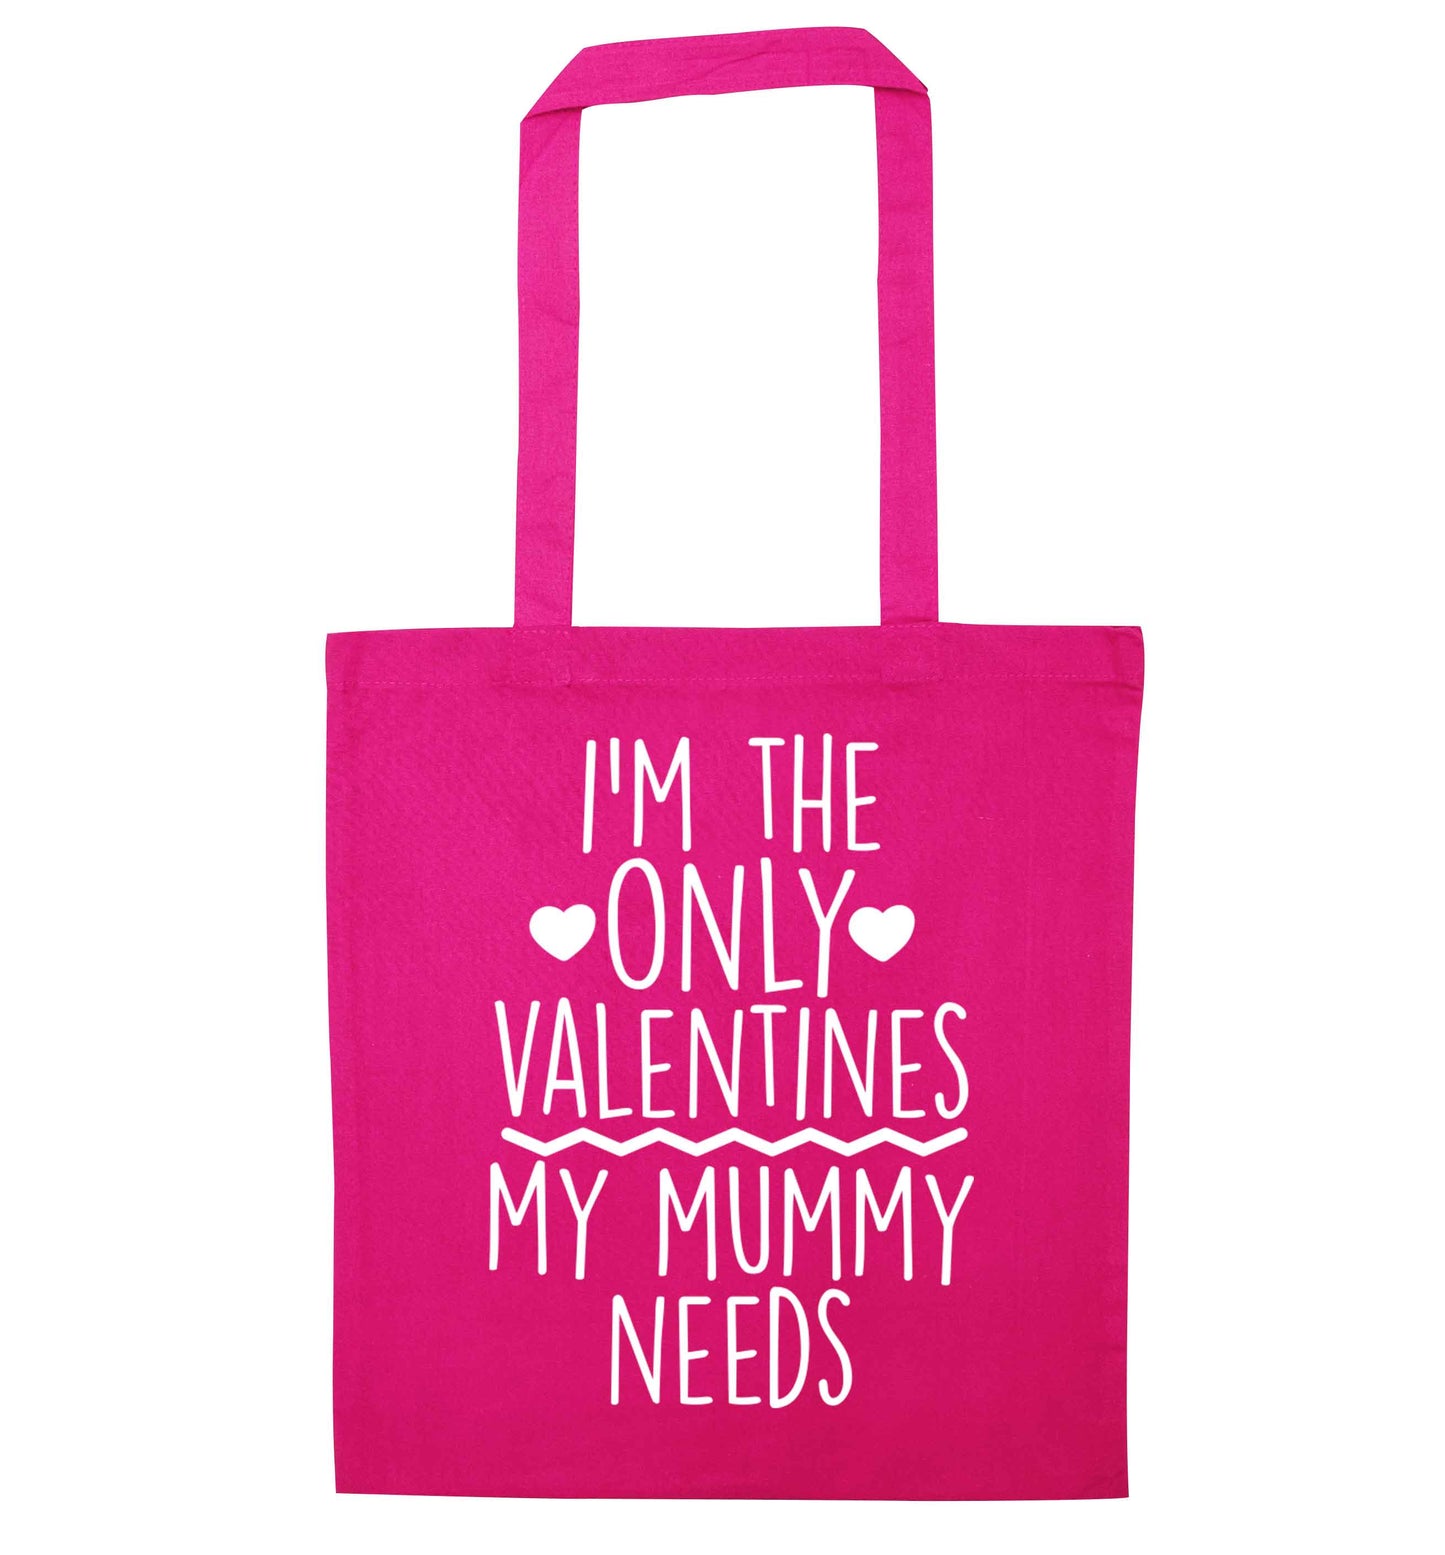 I'm the only valentines my mummy needs pink tote bag